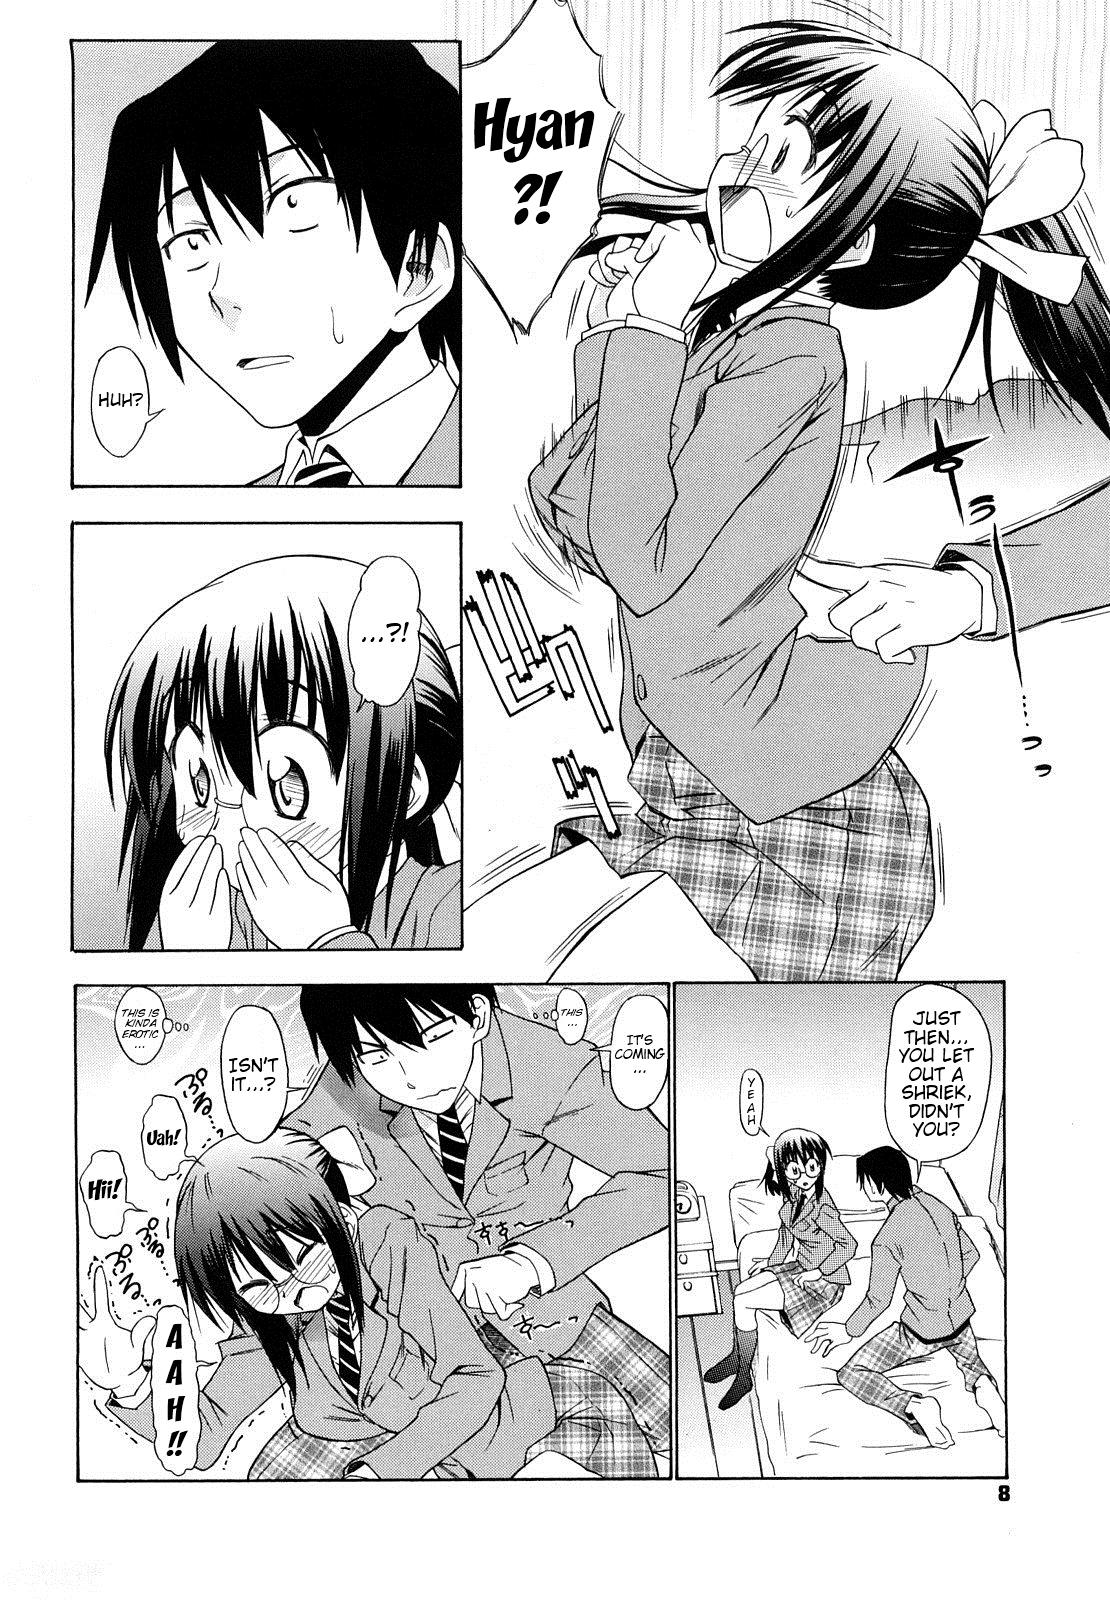 Hugetits Ai ga Ippai Ero wa Oppai | Lots of Love, Boobs are for Sex Gaygroup - Page 10